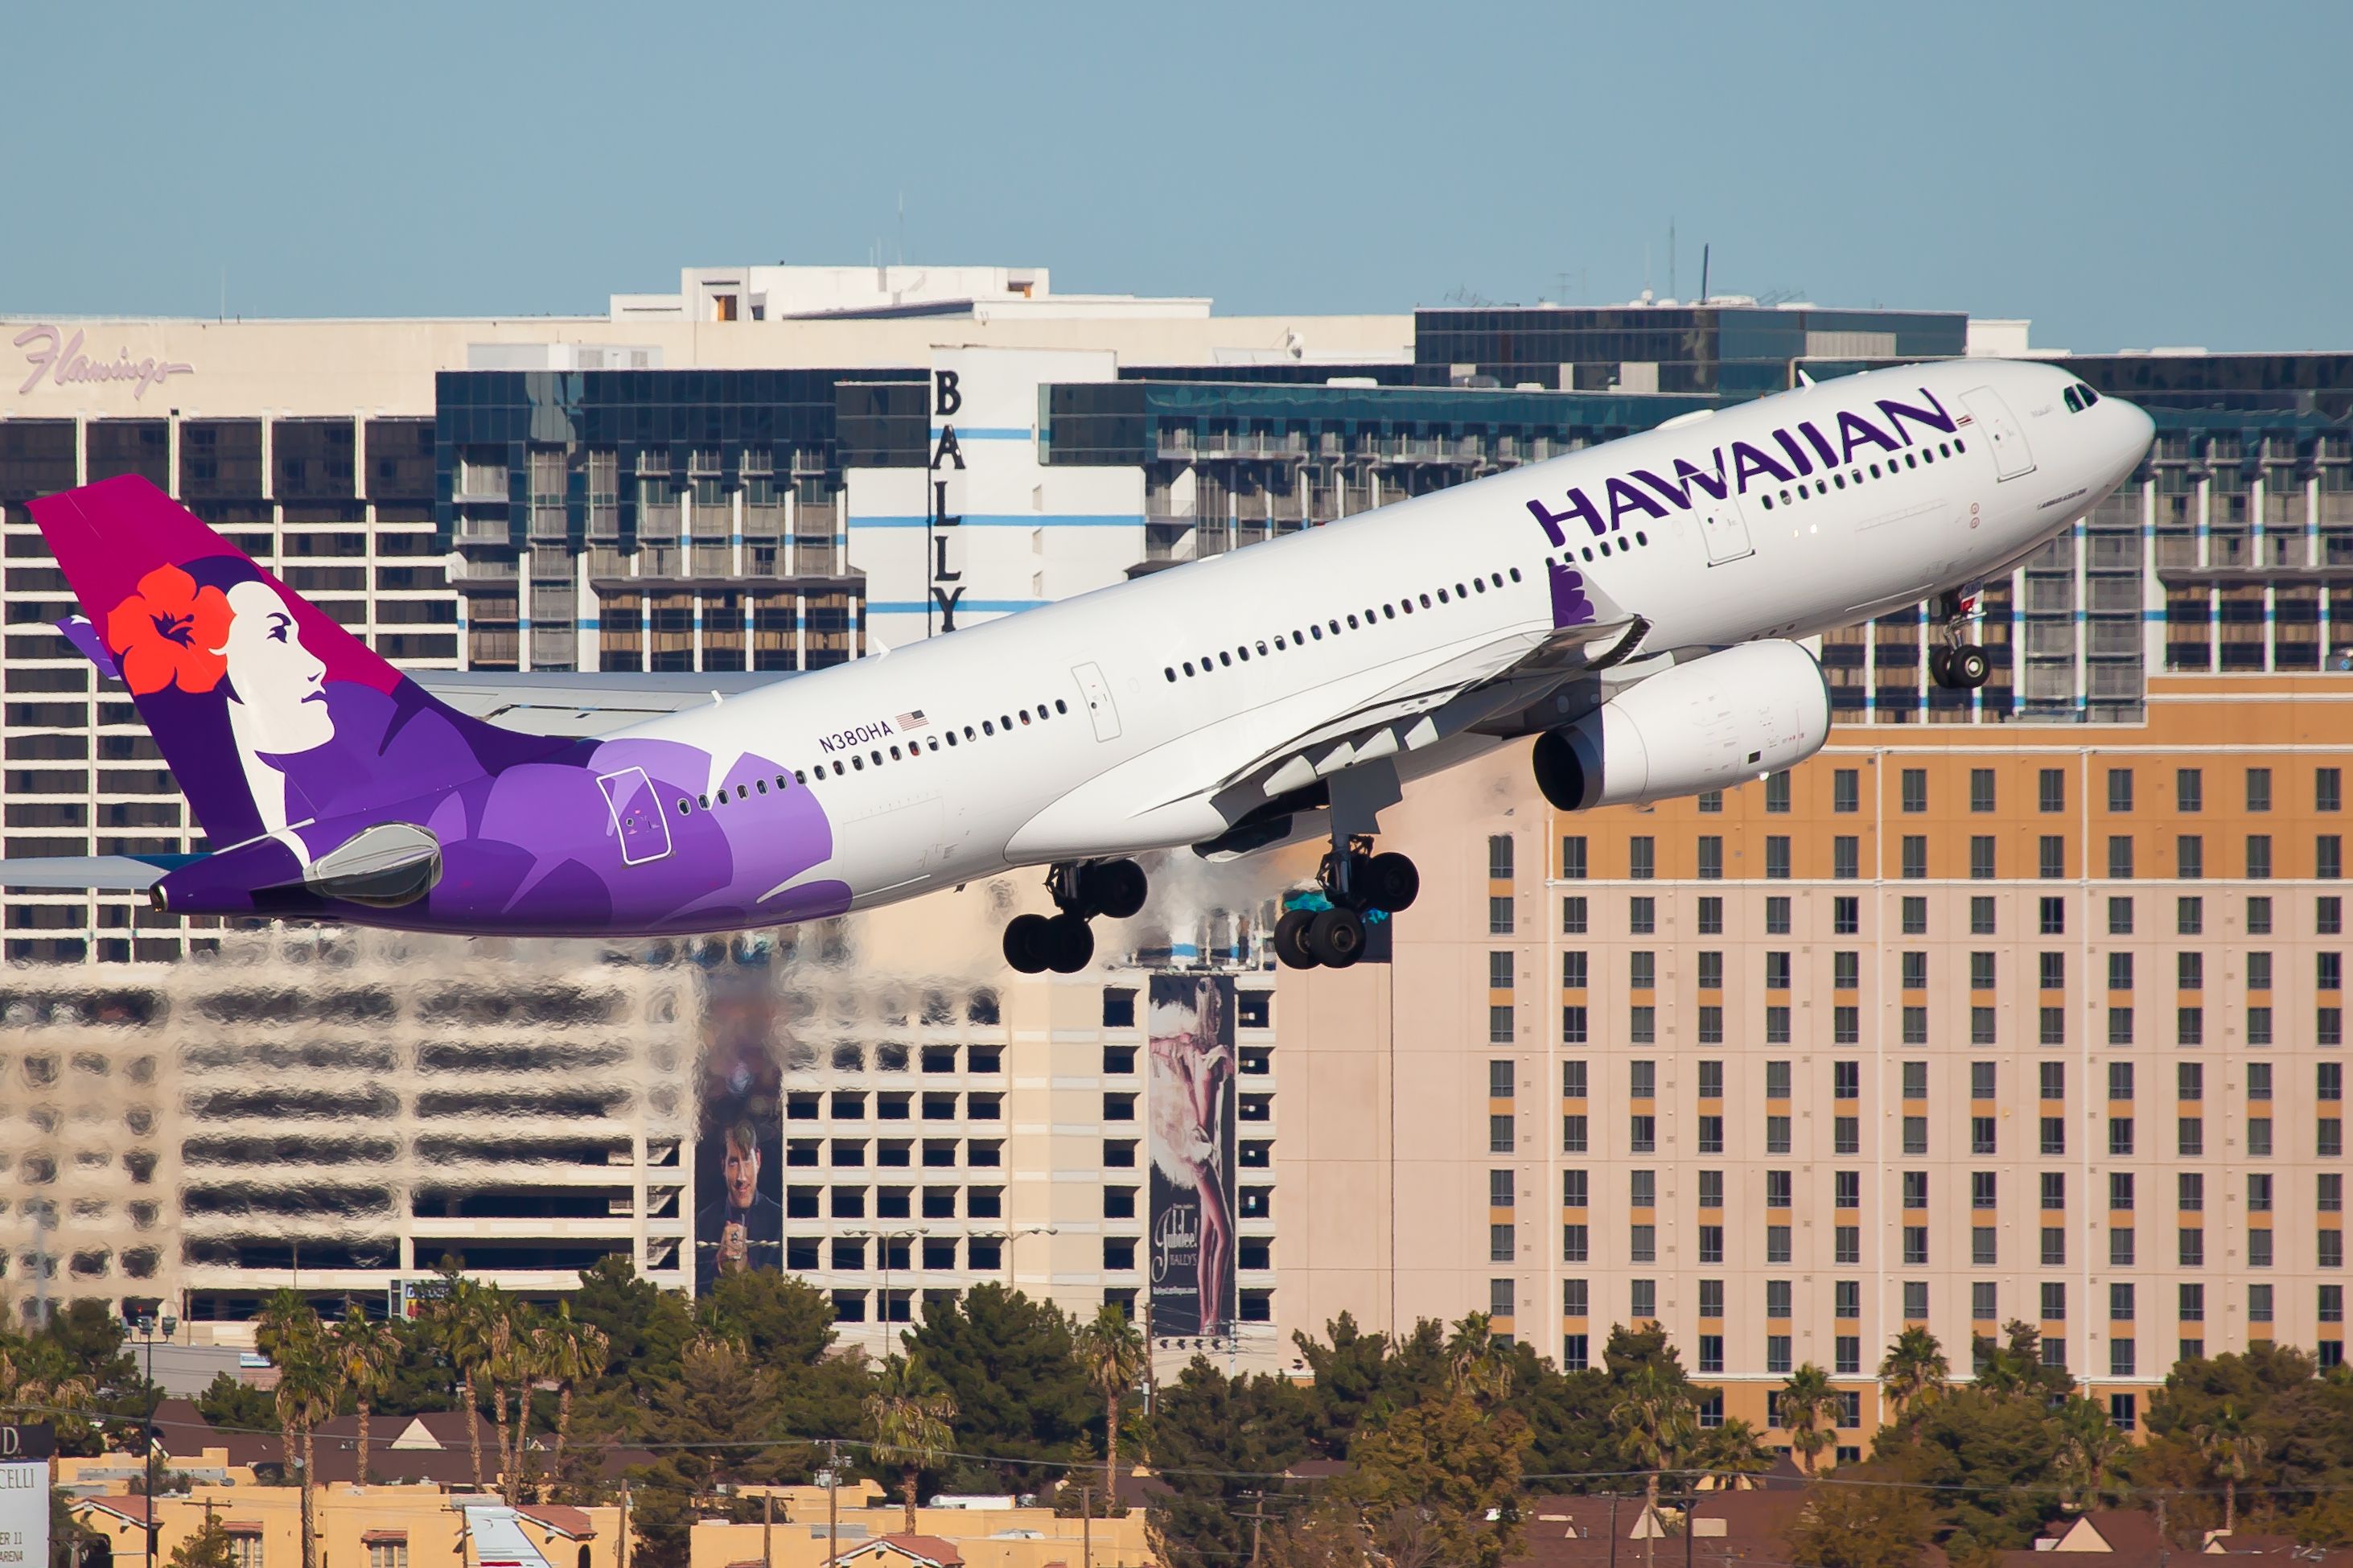 Hawaiian Airlines Airbus A330 taking off from Las Vegas.